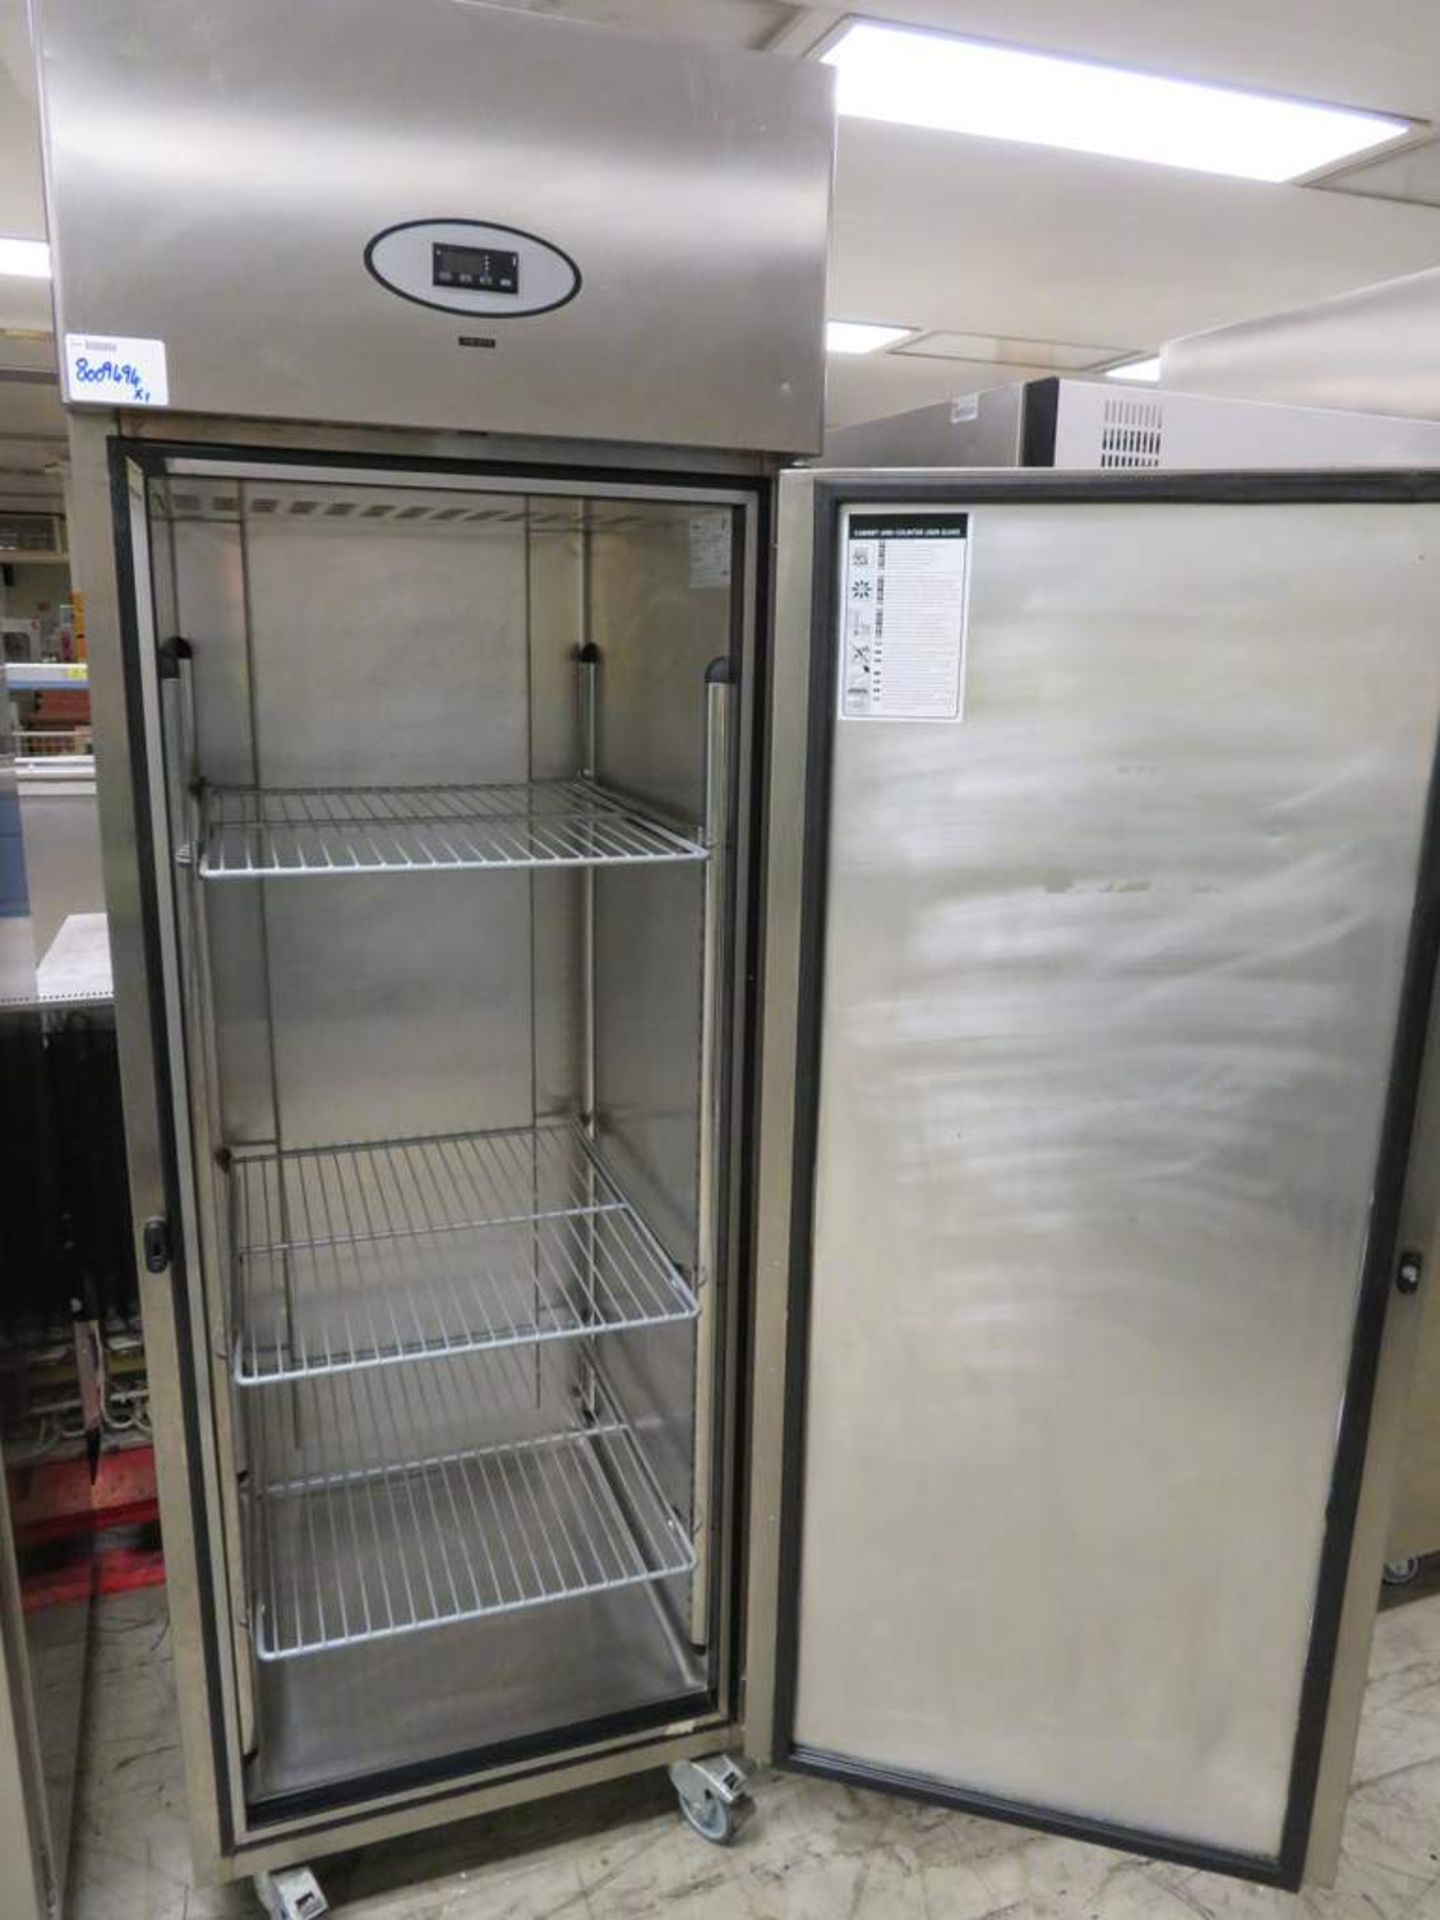 Foster PSG600LA stainless steel freezer - E5186336 - Image 2 of 6